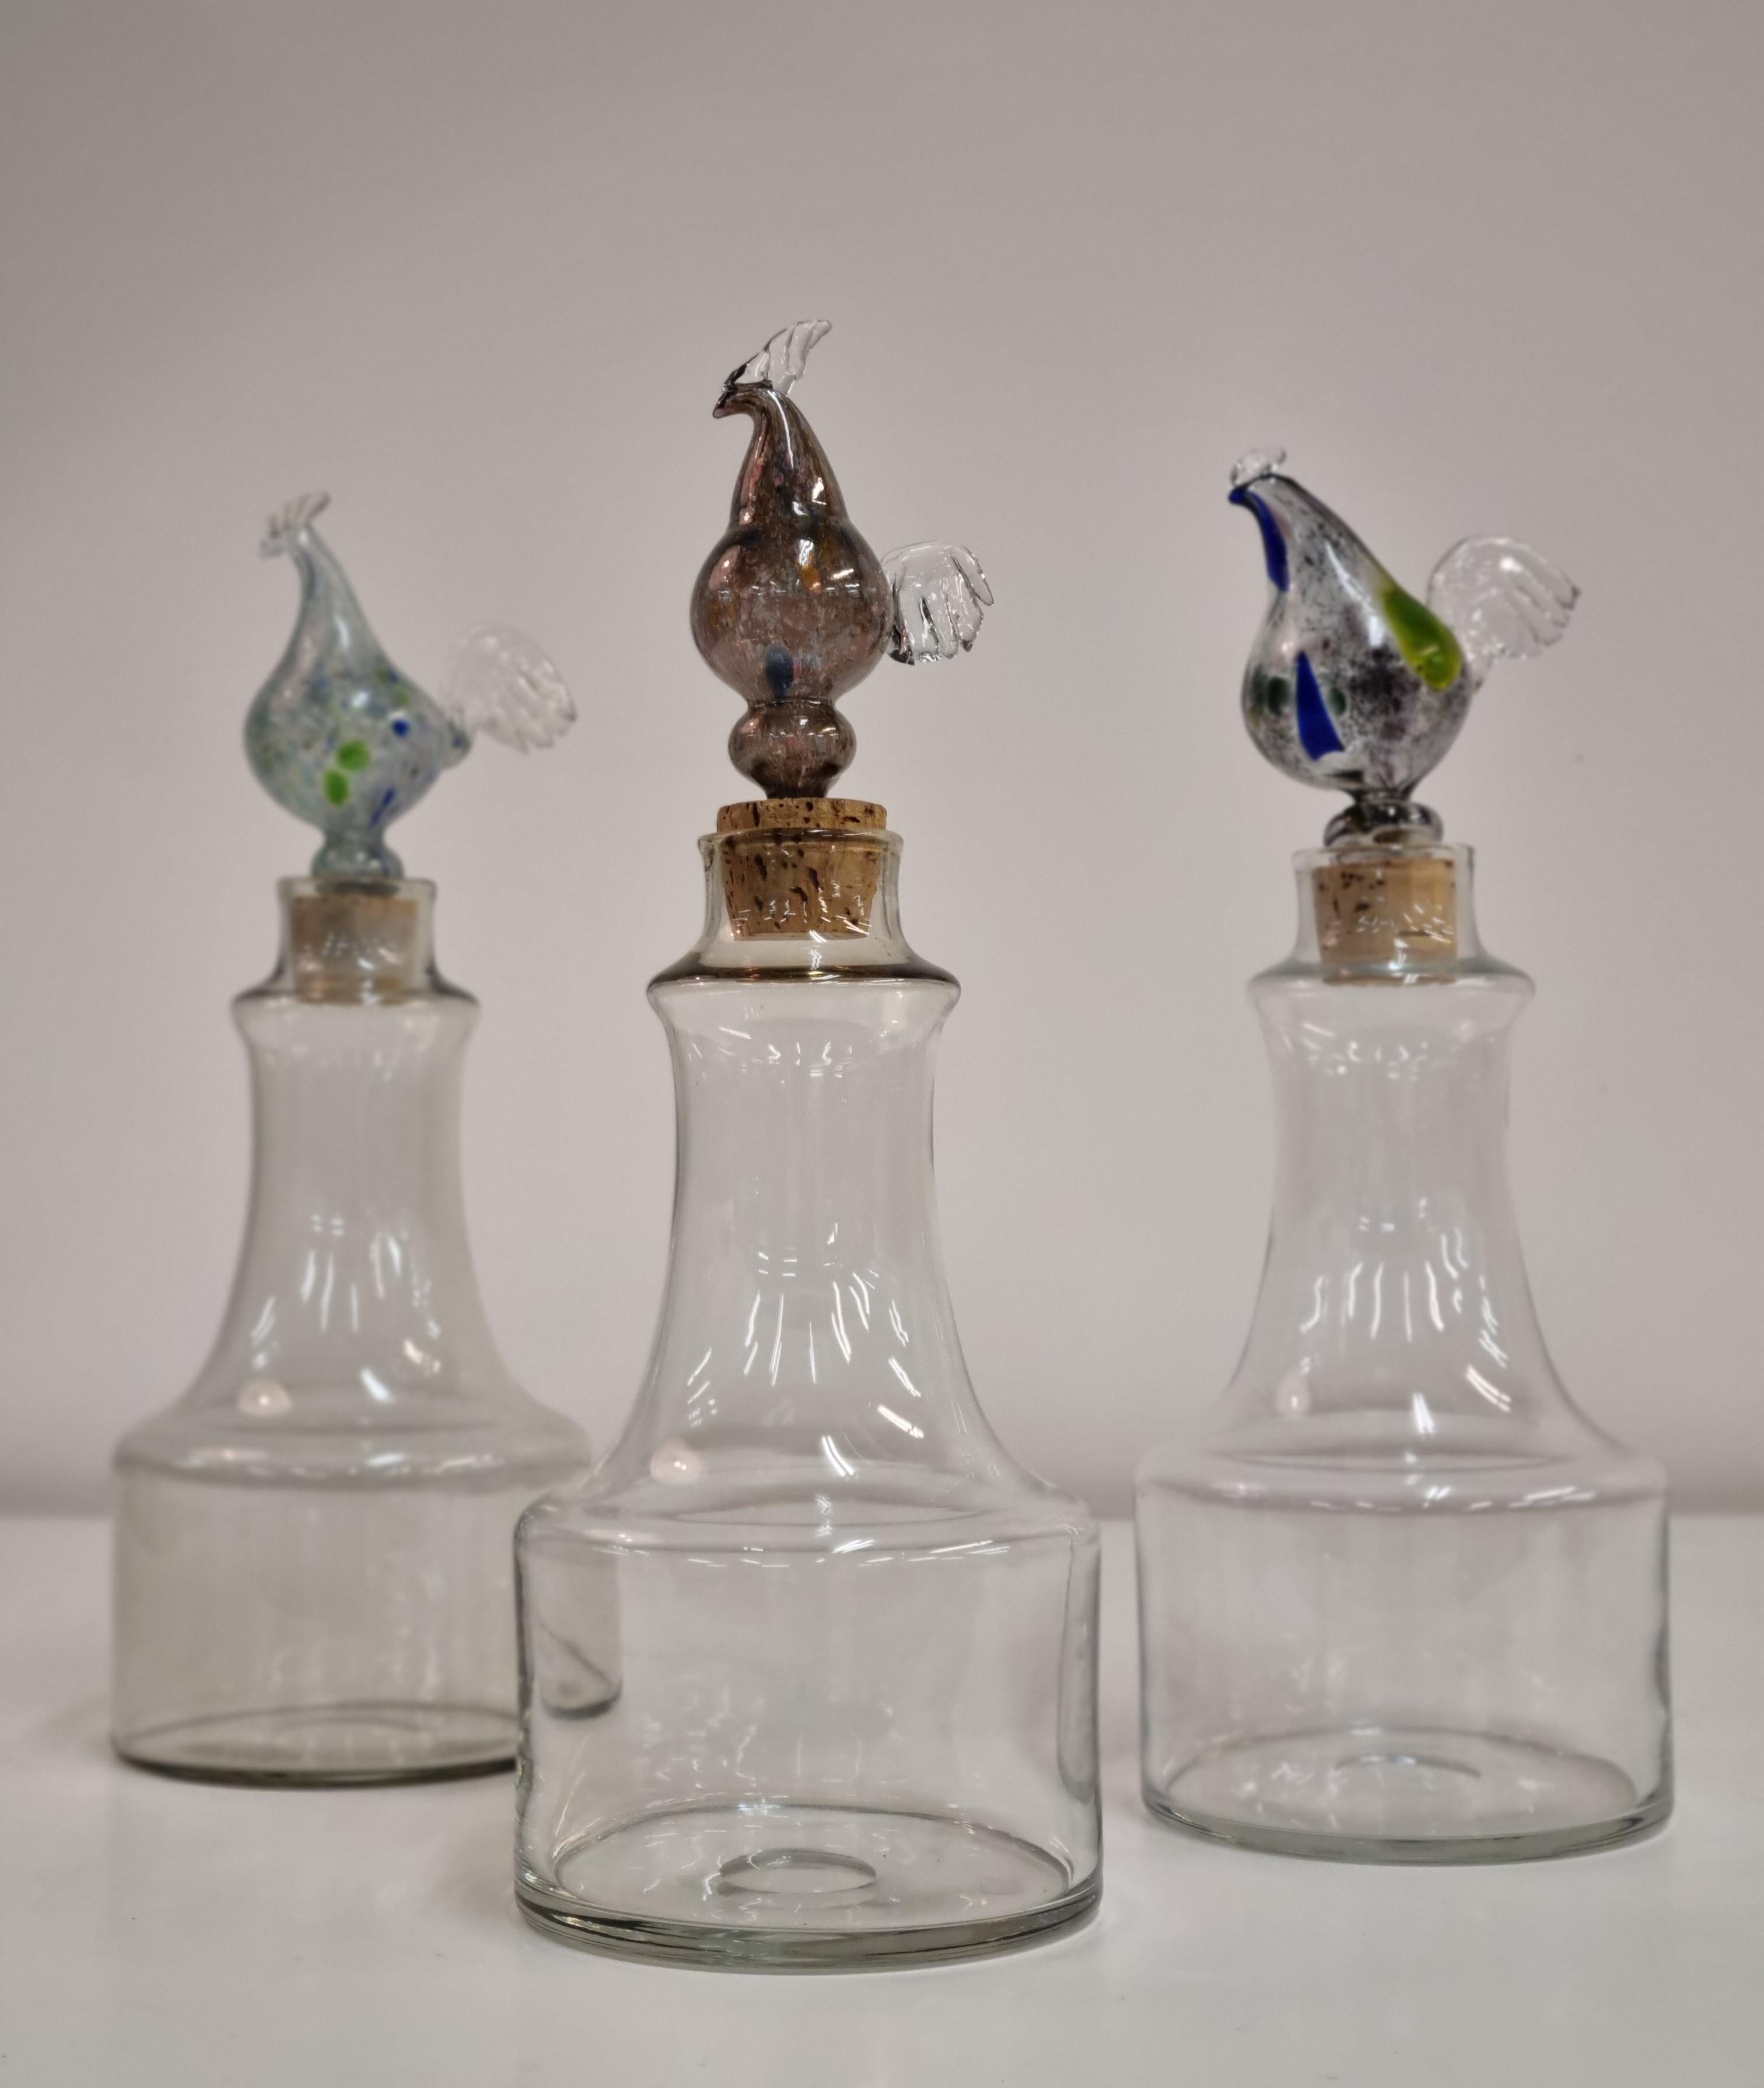 These are beautiful mould-blown glass decanters by the renowned designer Kaj Franck. This object has a distinctive cock stopper on the top, but can be used with or without. This particular series of decanters by Kaj Franck was manufactured for a